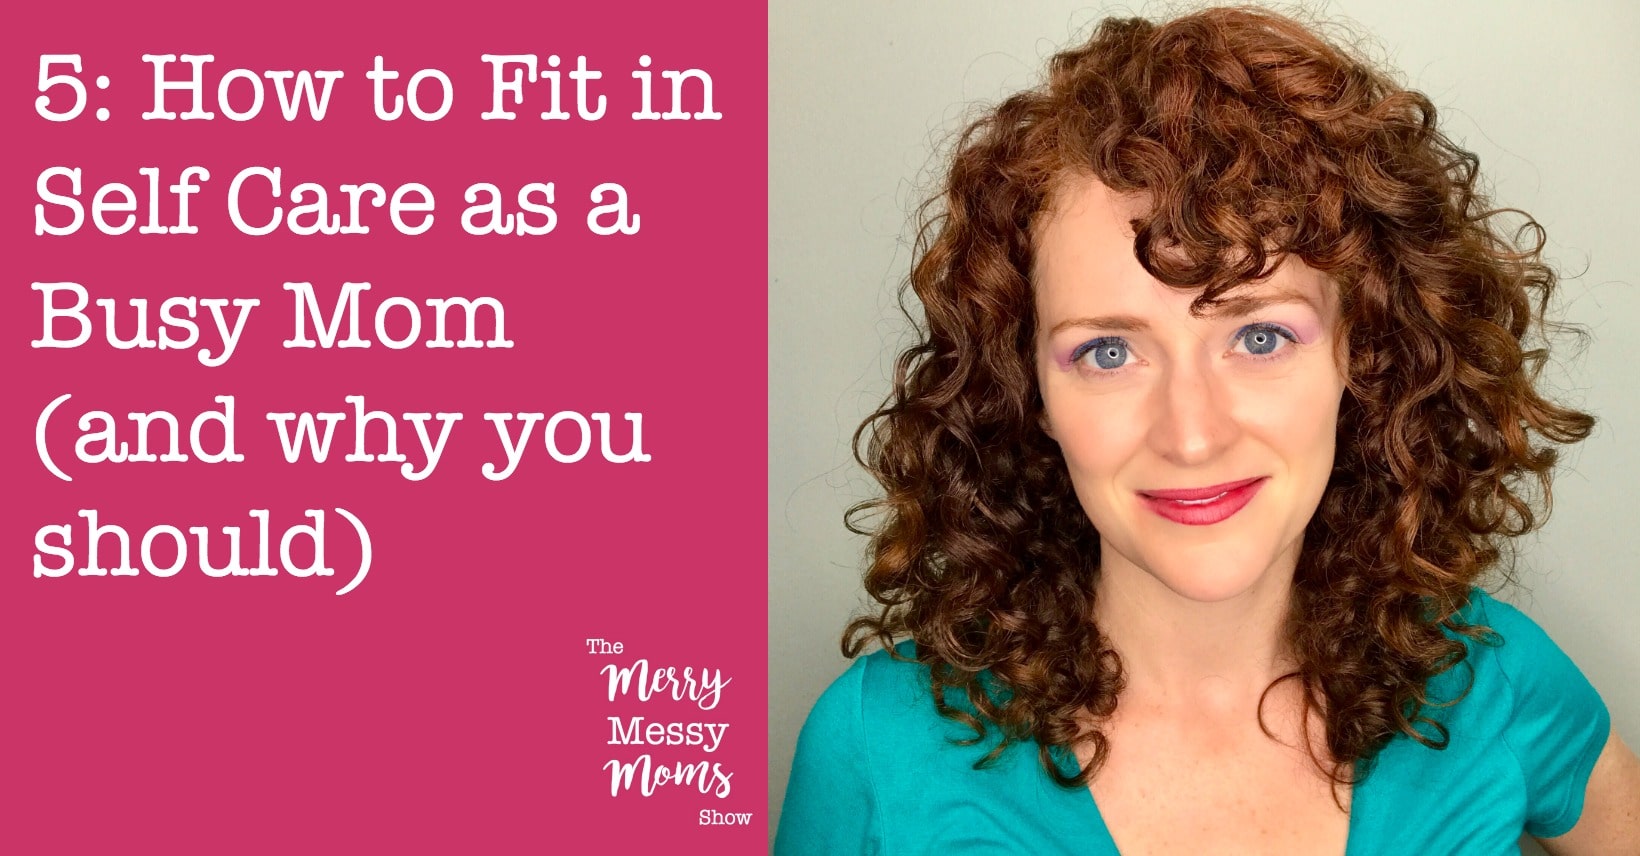 How to Fit in Self Care as a Busy Mom and Why You Should - The Merry Messy Moms Show Podcast with Sara McFall